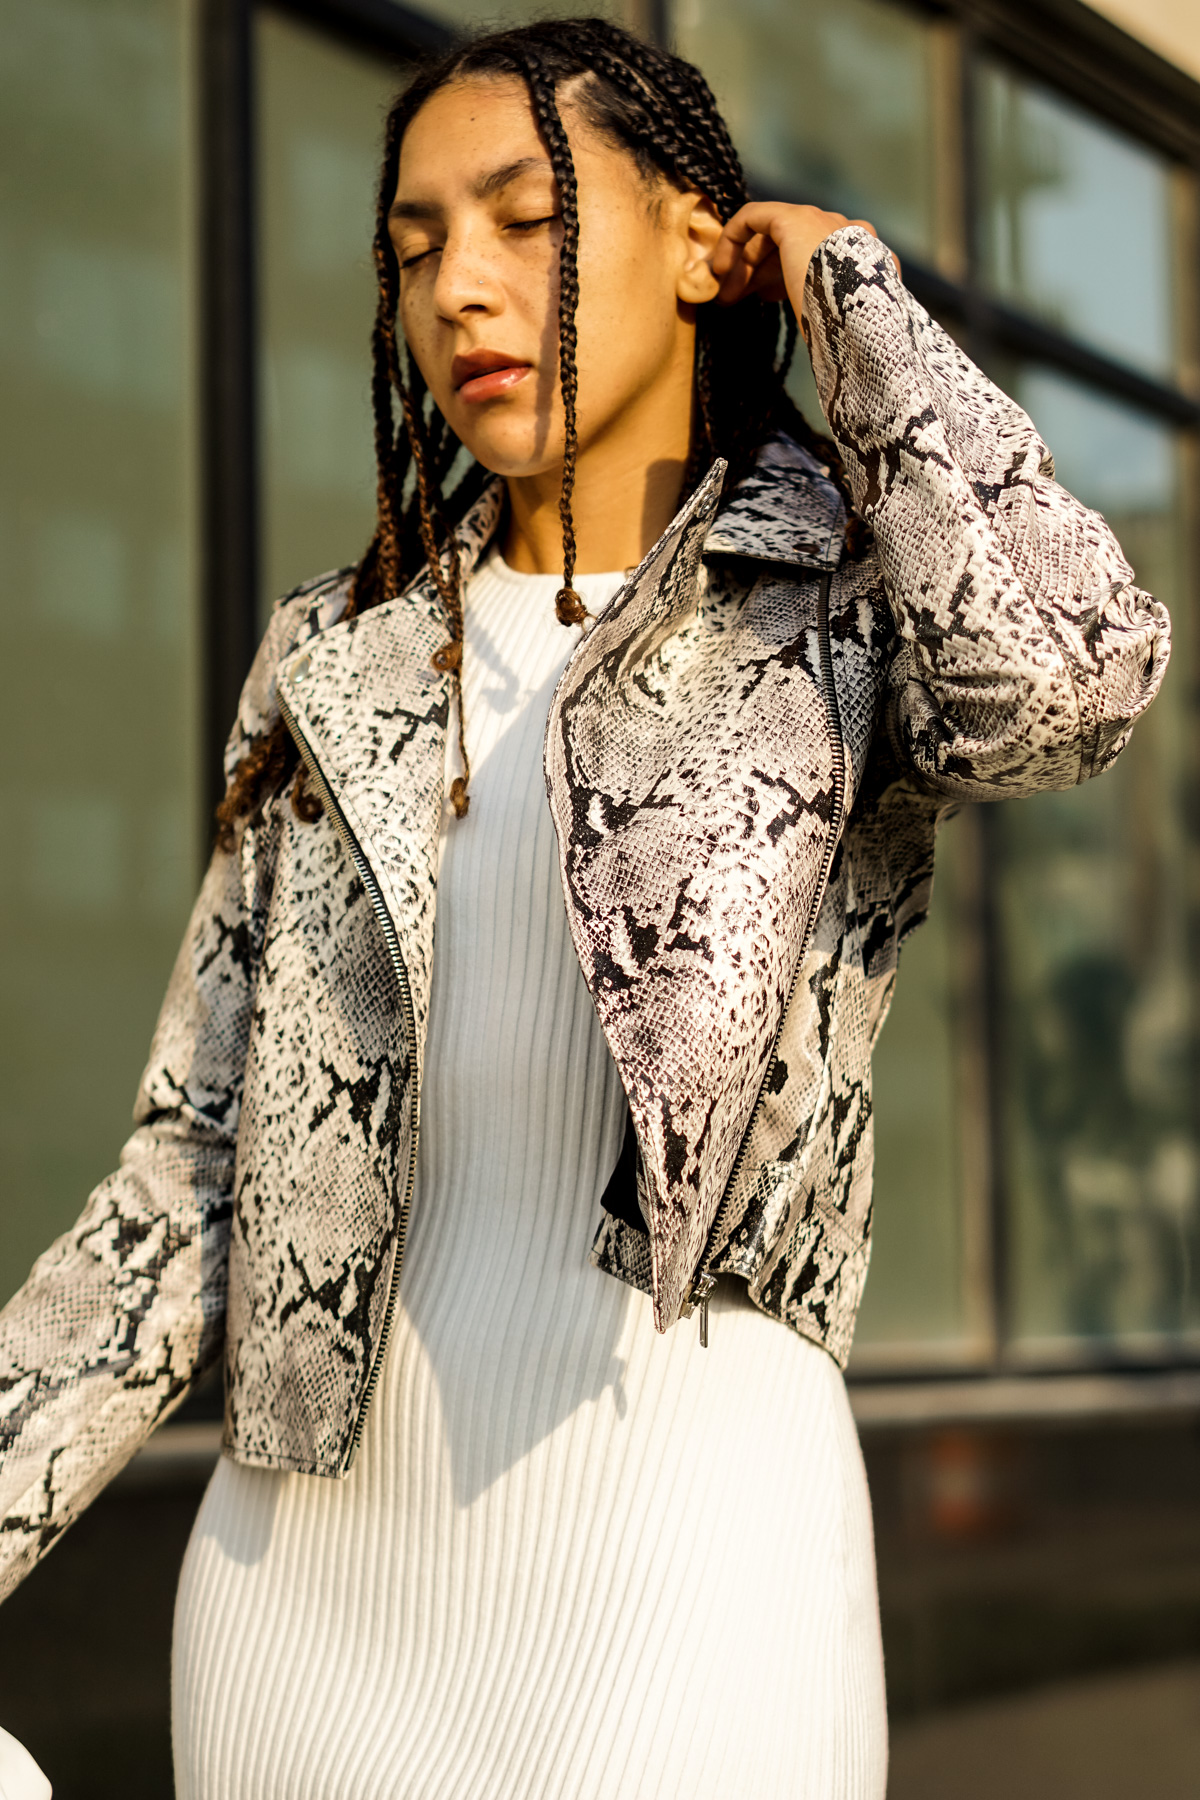 snake print jacket outfit idea for women, chic fall outfit ideas for women, black fashion bloggers inspiration, snake print outfit idea black girl